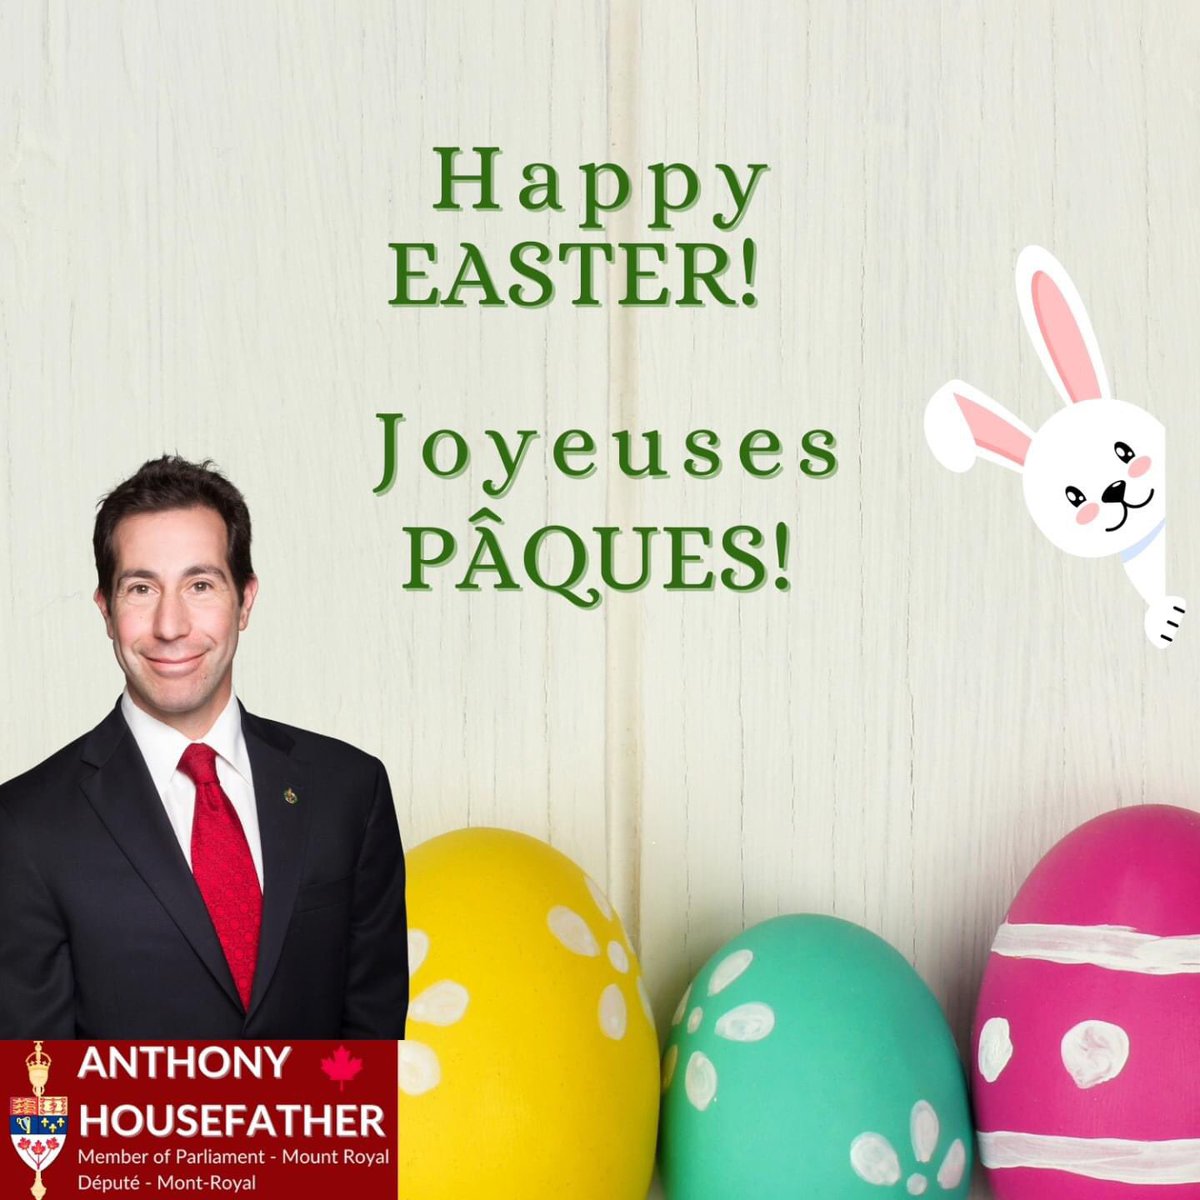 Happy Easter!! Joyeuses Pacques!